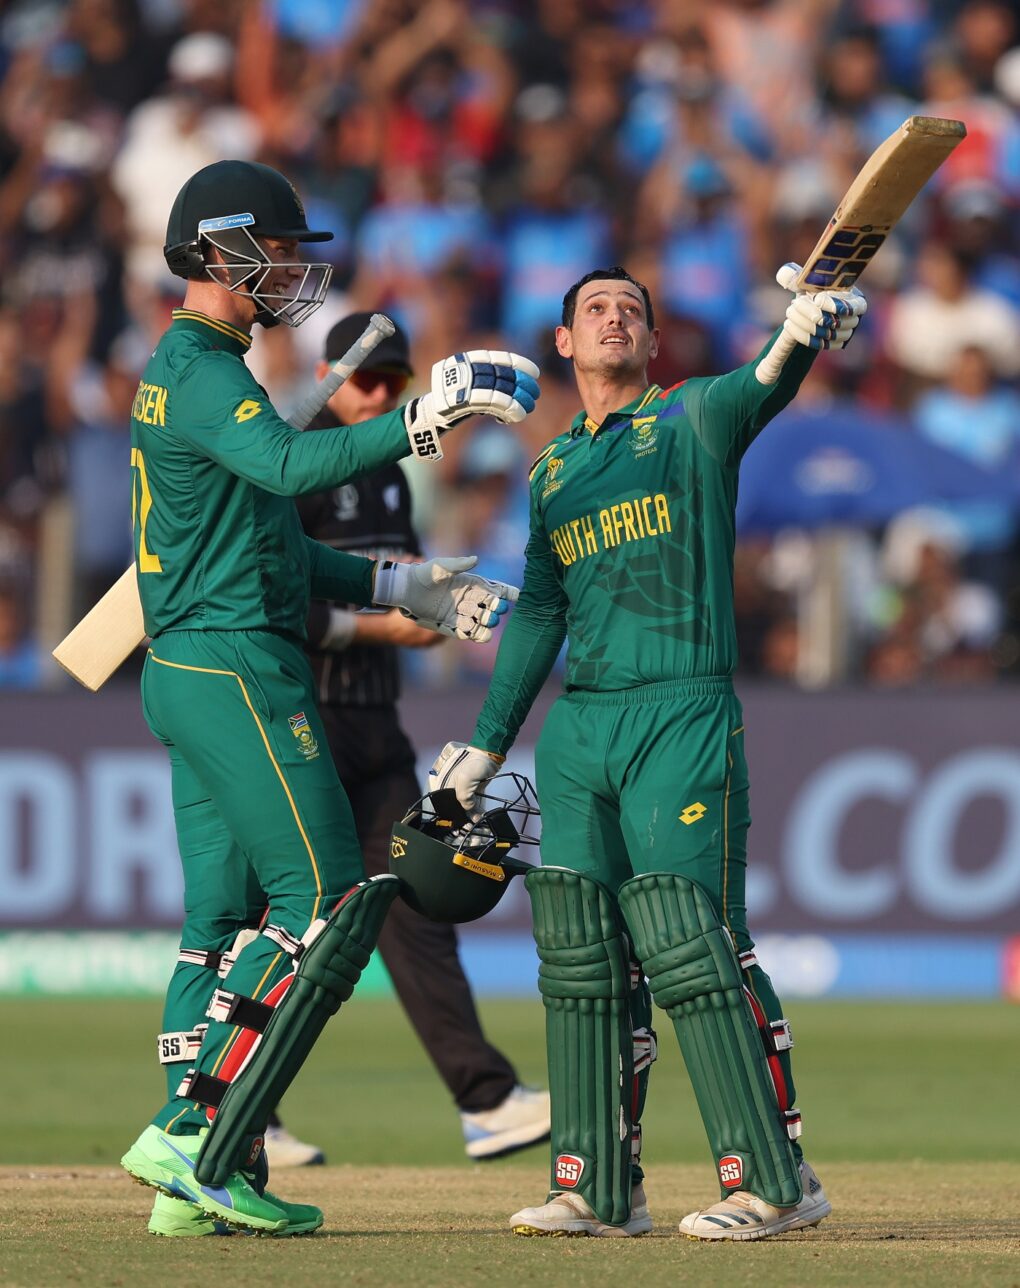 South Africa go top as New Zealand slump to third straight defeat